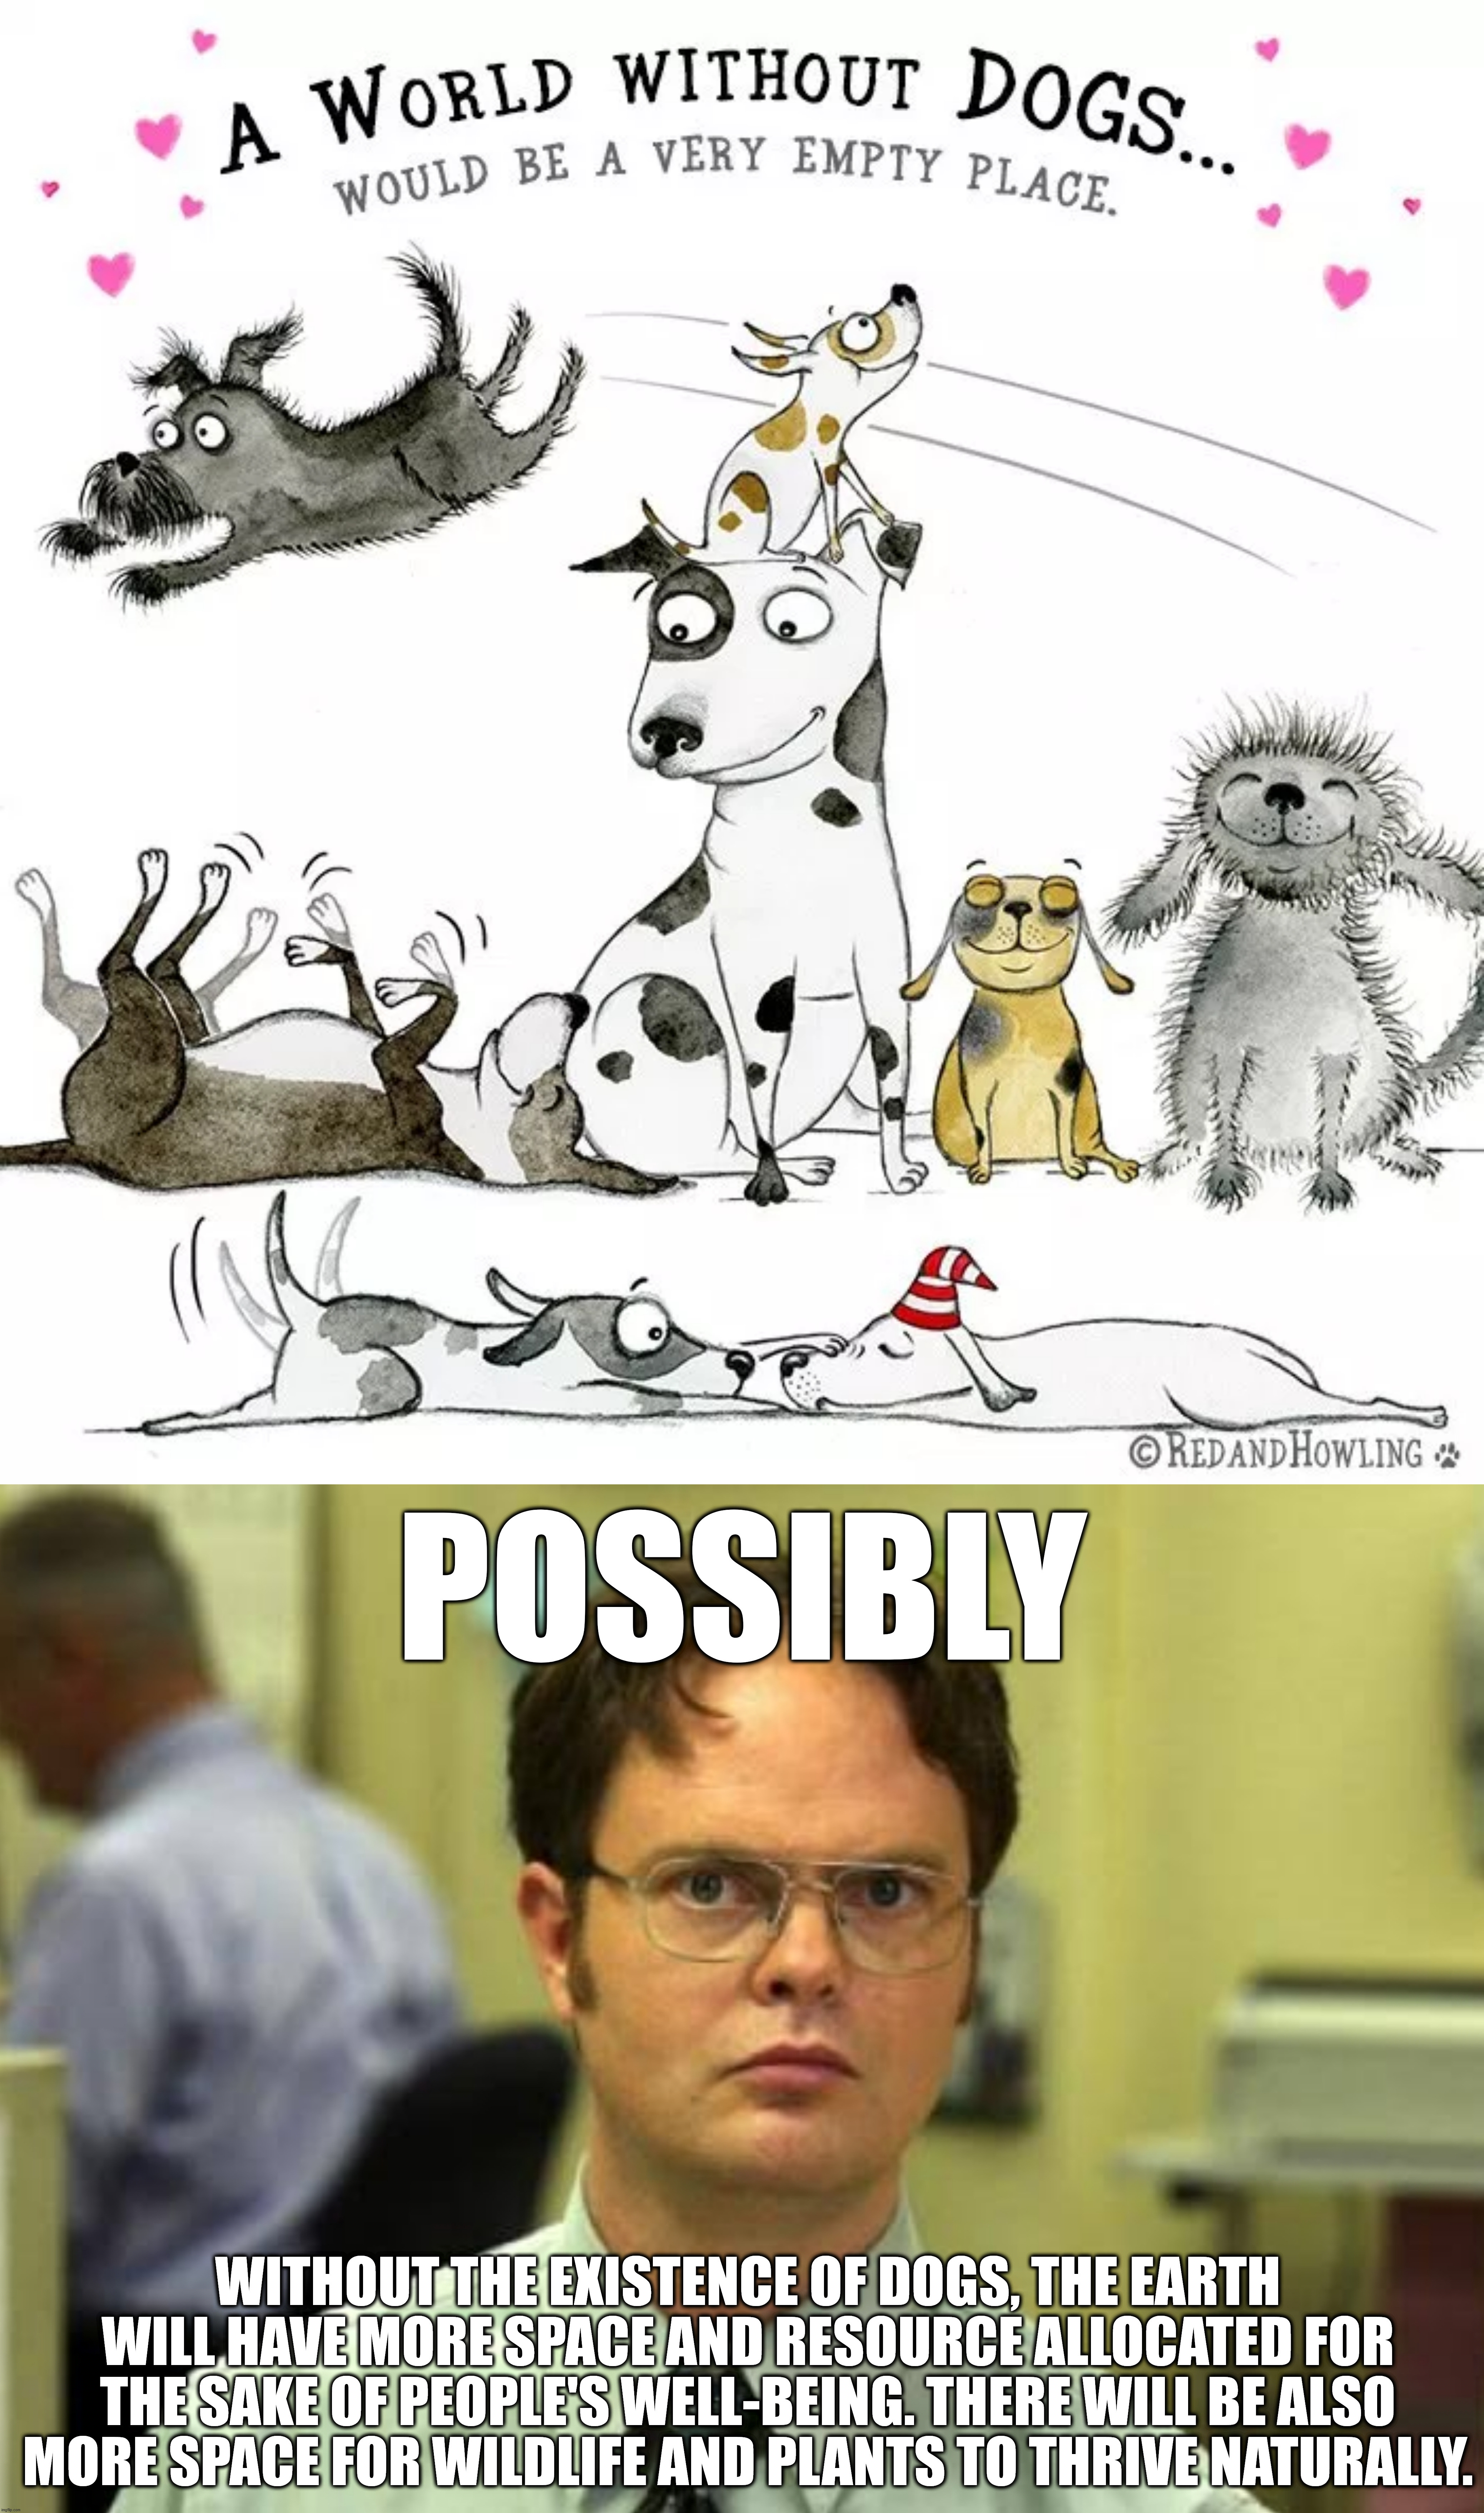 A world without dogs... | image tagged in dogs,dwight schrute,science,nature,humanity | made w/ Imgflip meme maker